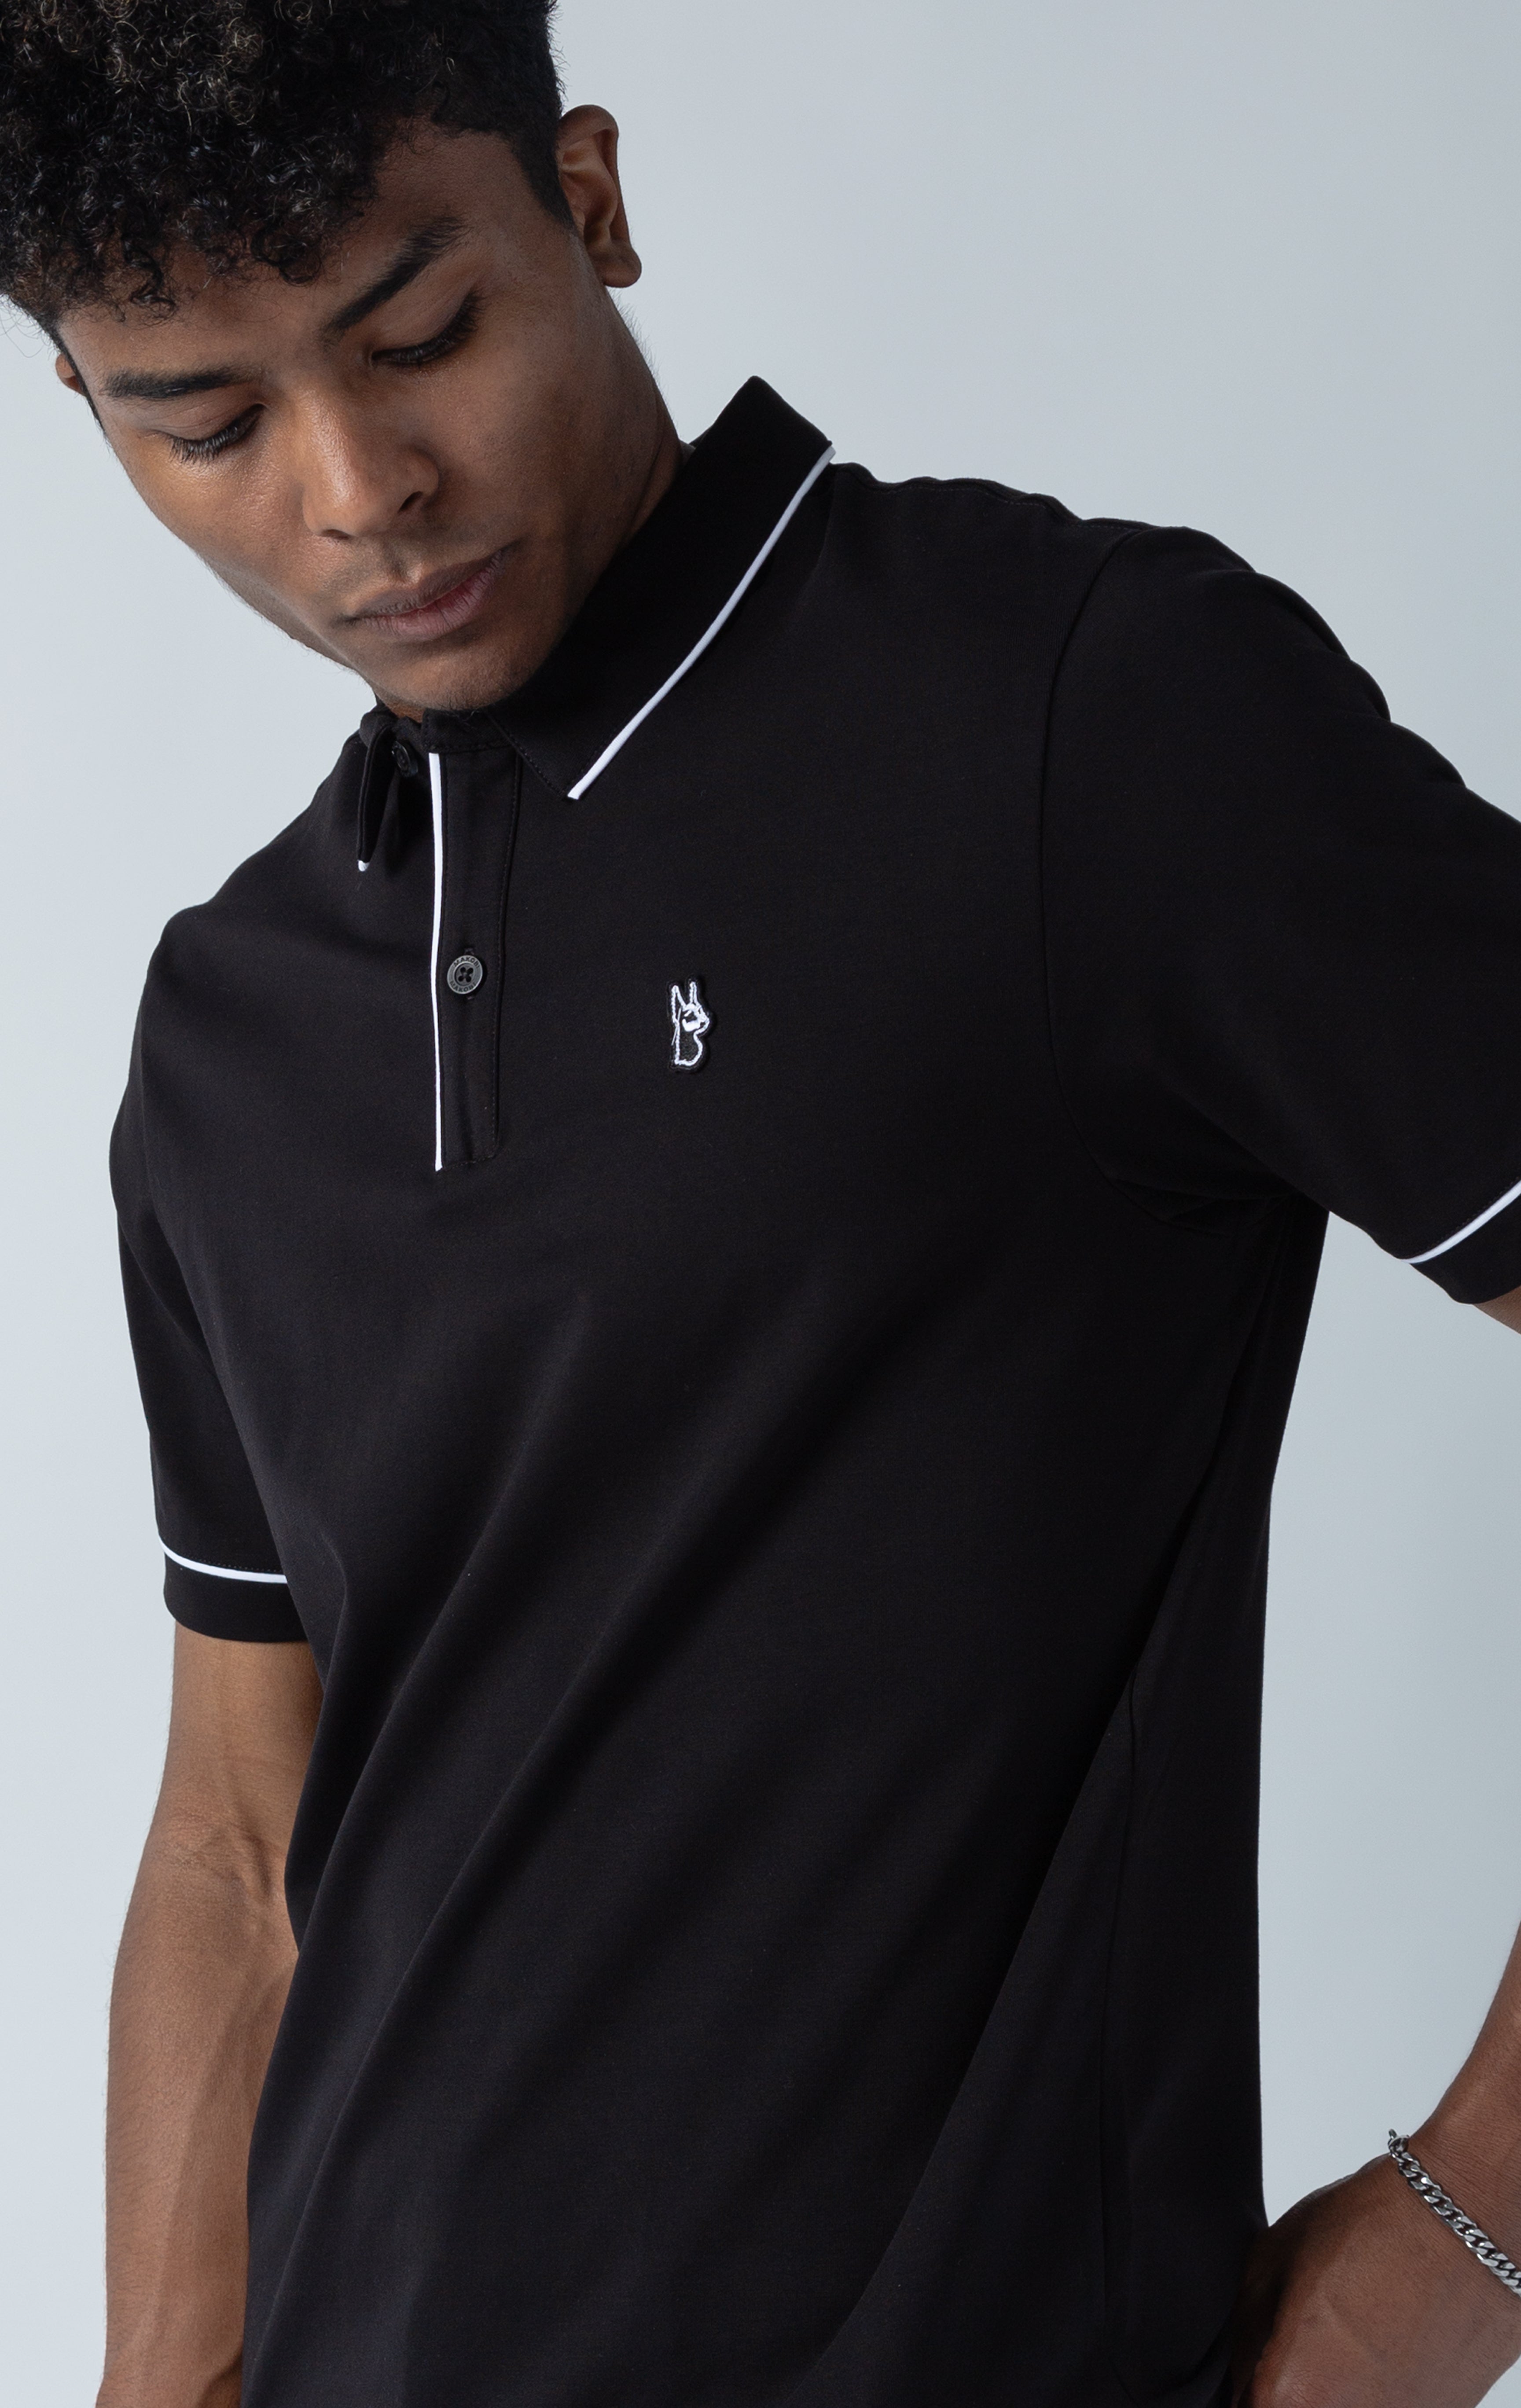 Black Luciano stretch premium jersey polo shirt with collared detailing, short-sleeved composition, three button front fastening. MAKOBI custom made design